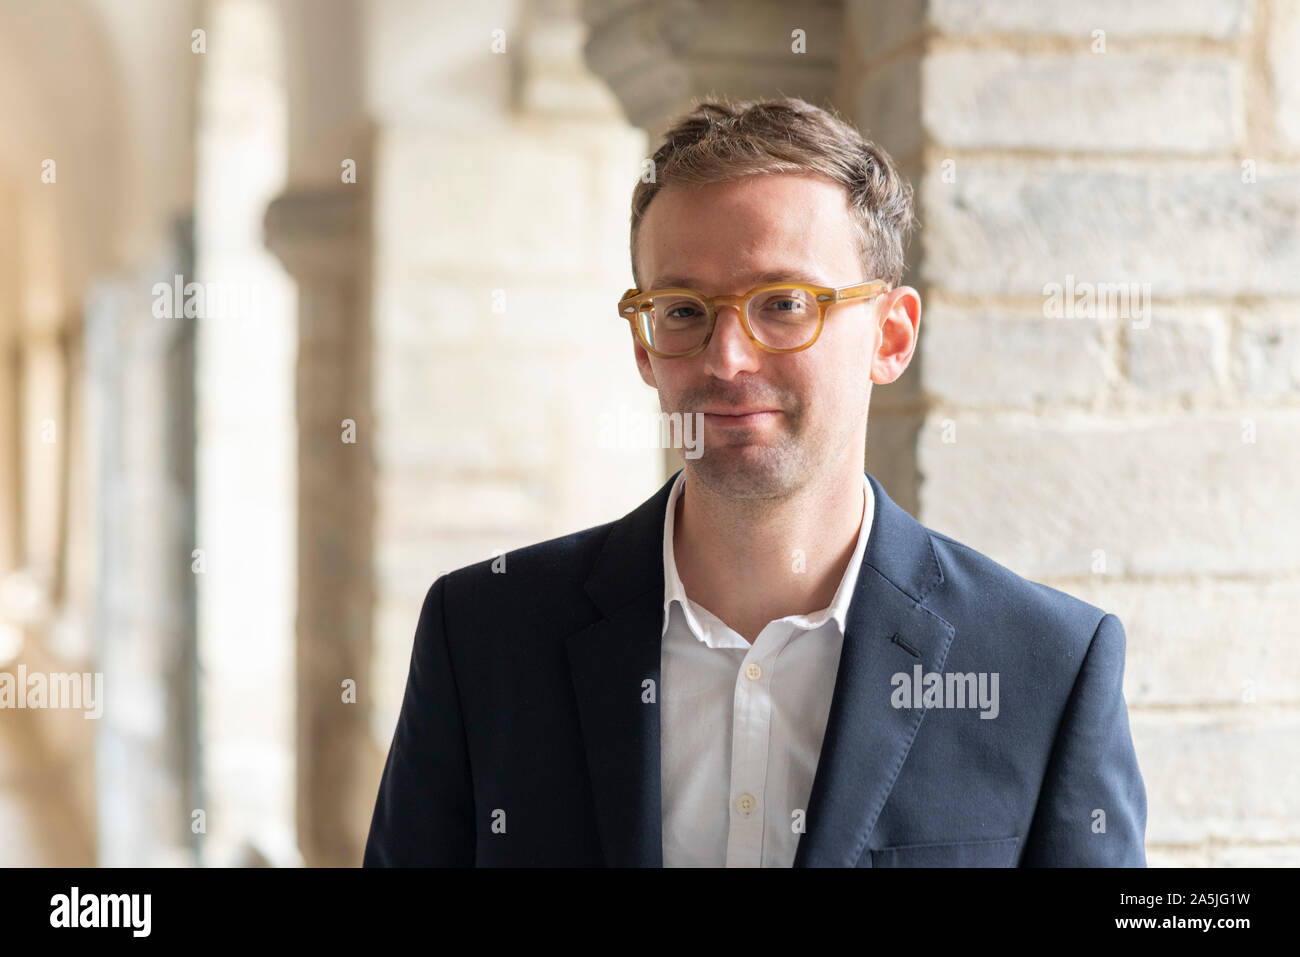 Dr. Neil Wilkin, curator for the Bronze Age at the Bristish Museum in London, stand in the monastery Unser Lieben Frauen in Magdeburg, ermany. He take Stock Photo